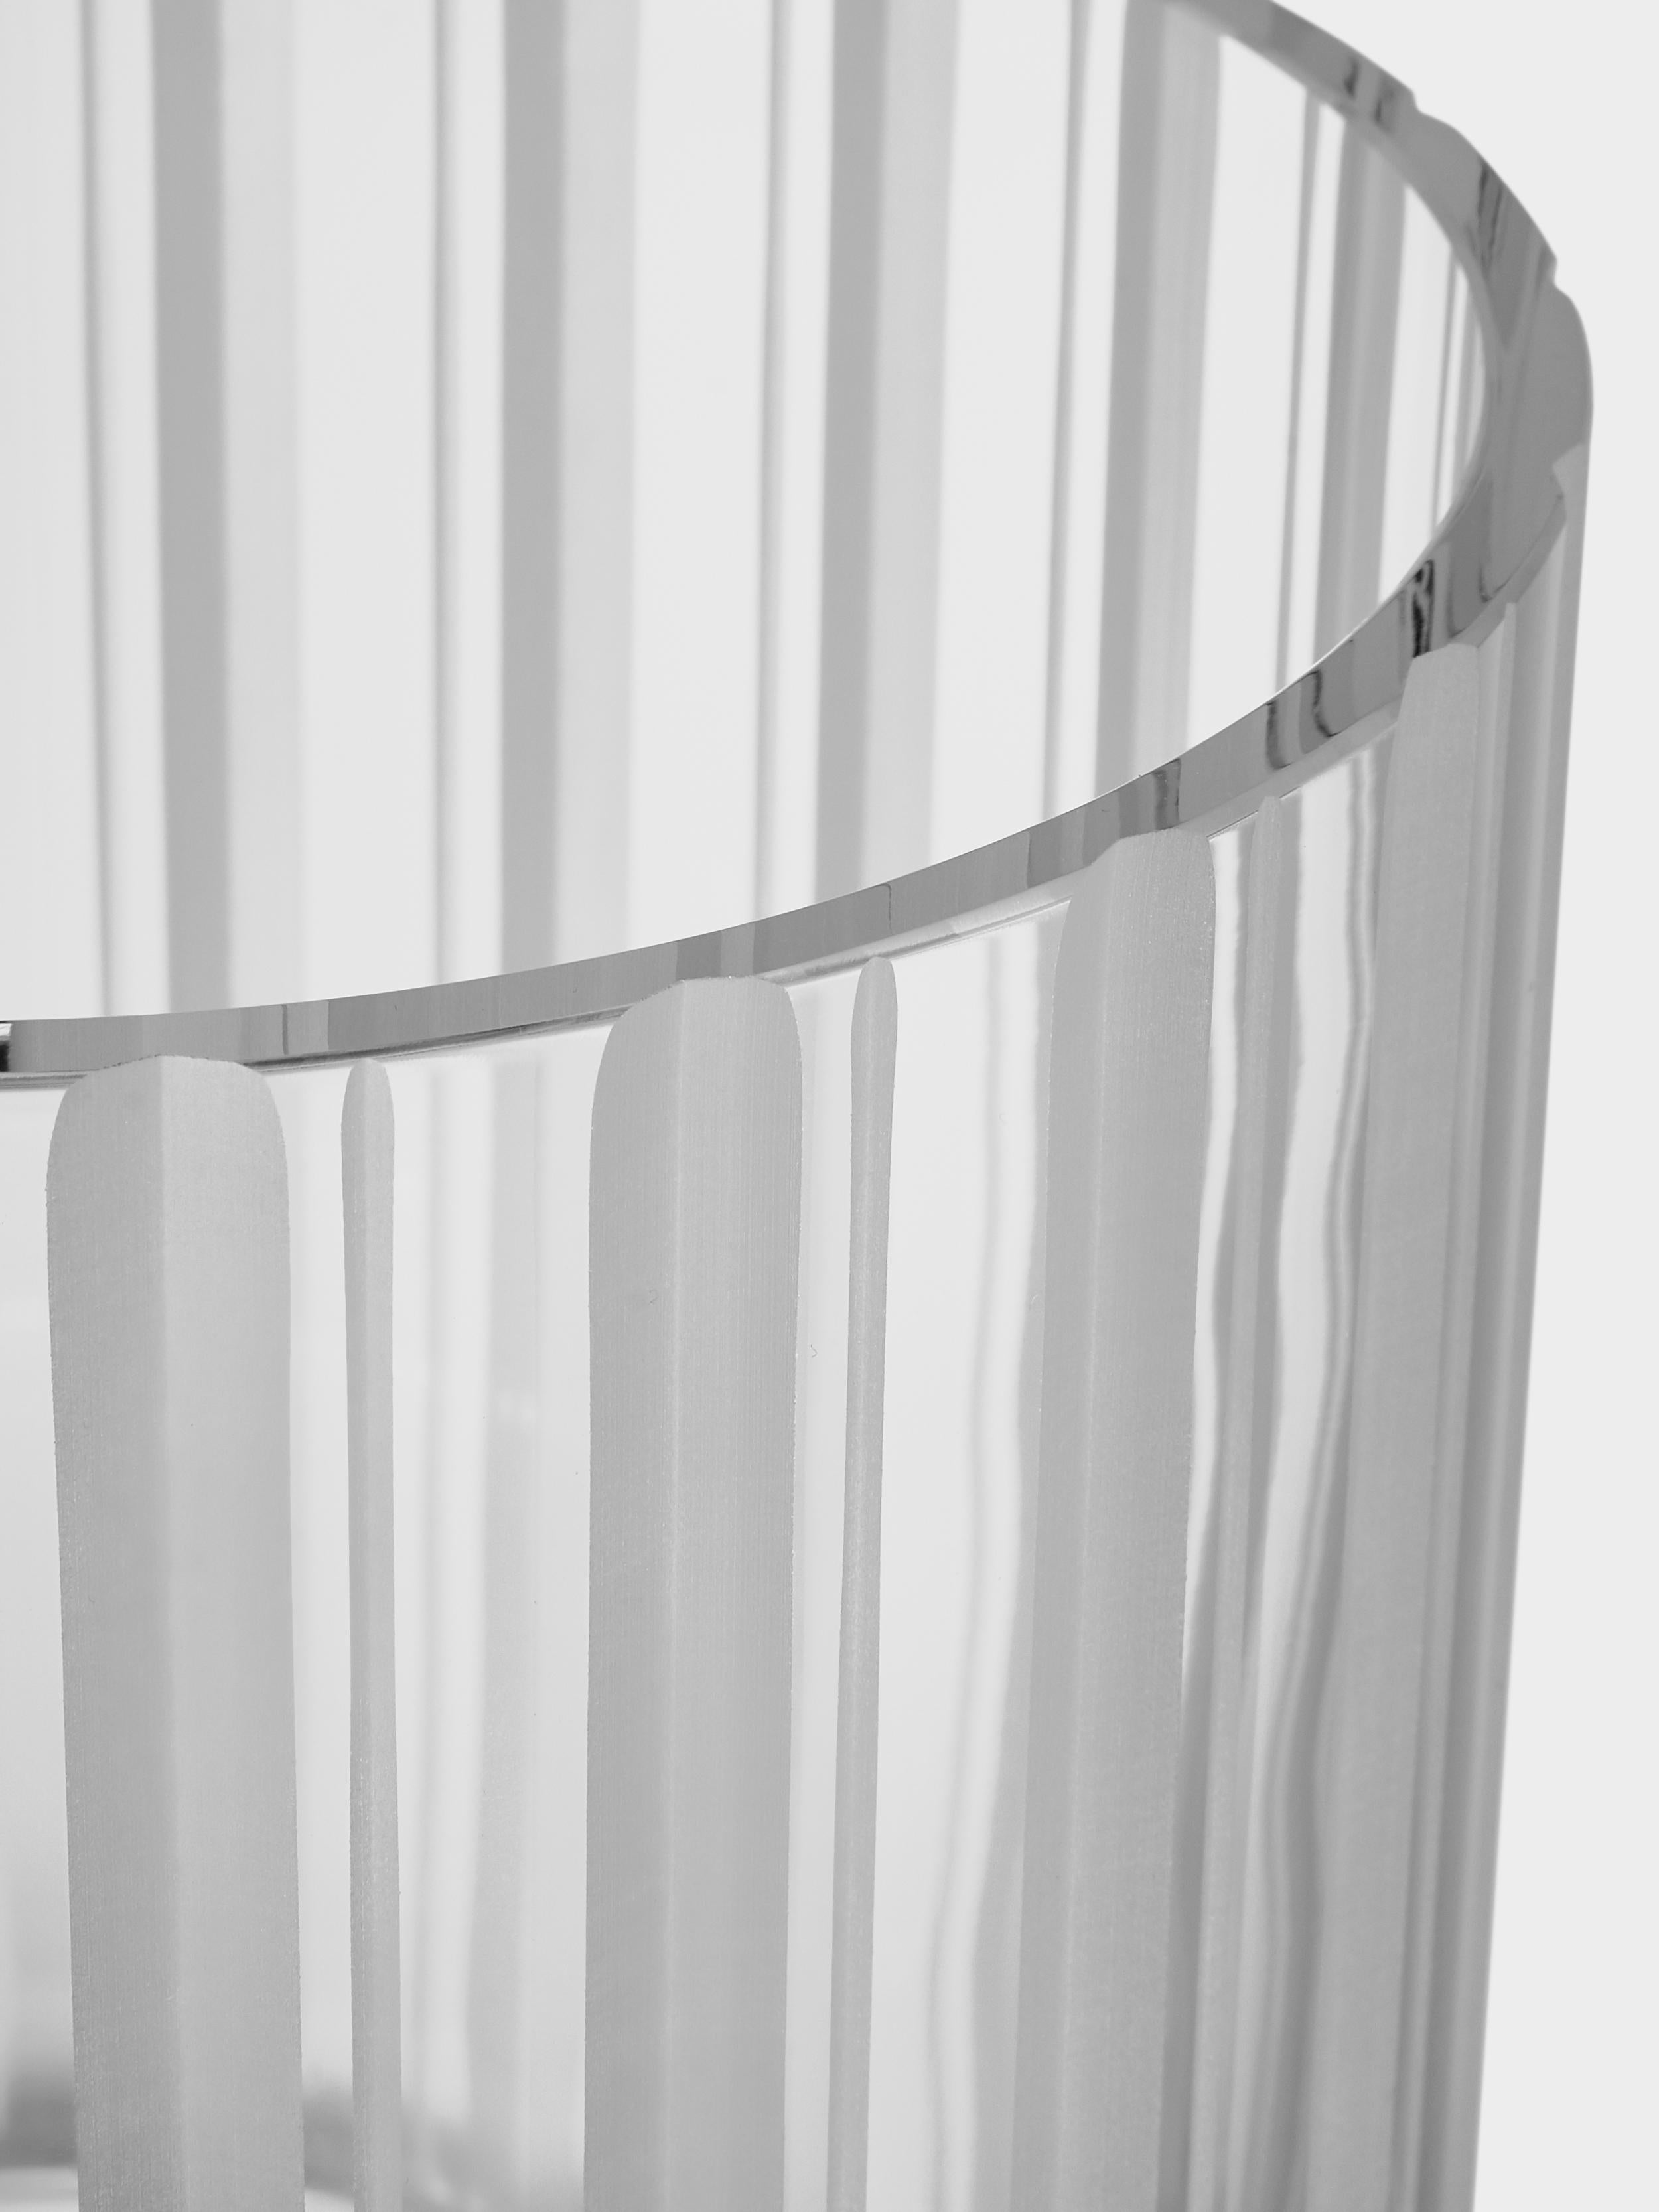 The low cylinder vase with a stripe motif in the Cut In Number collection from Orrefors is ideal for top-heavy floral arrangements. The satin finished cuts on the vase beautifully emphasize the transparency of the clear crystal. Designed by Ingegerd